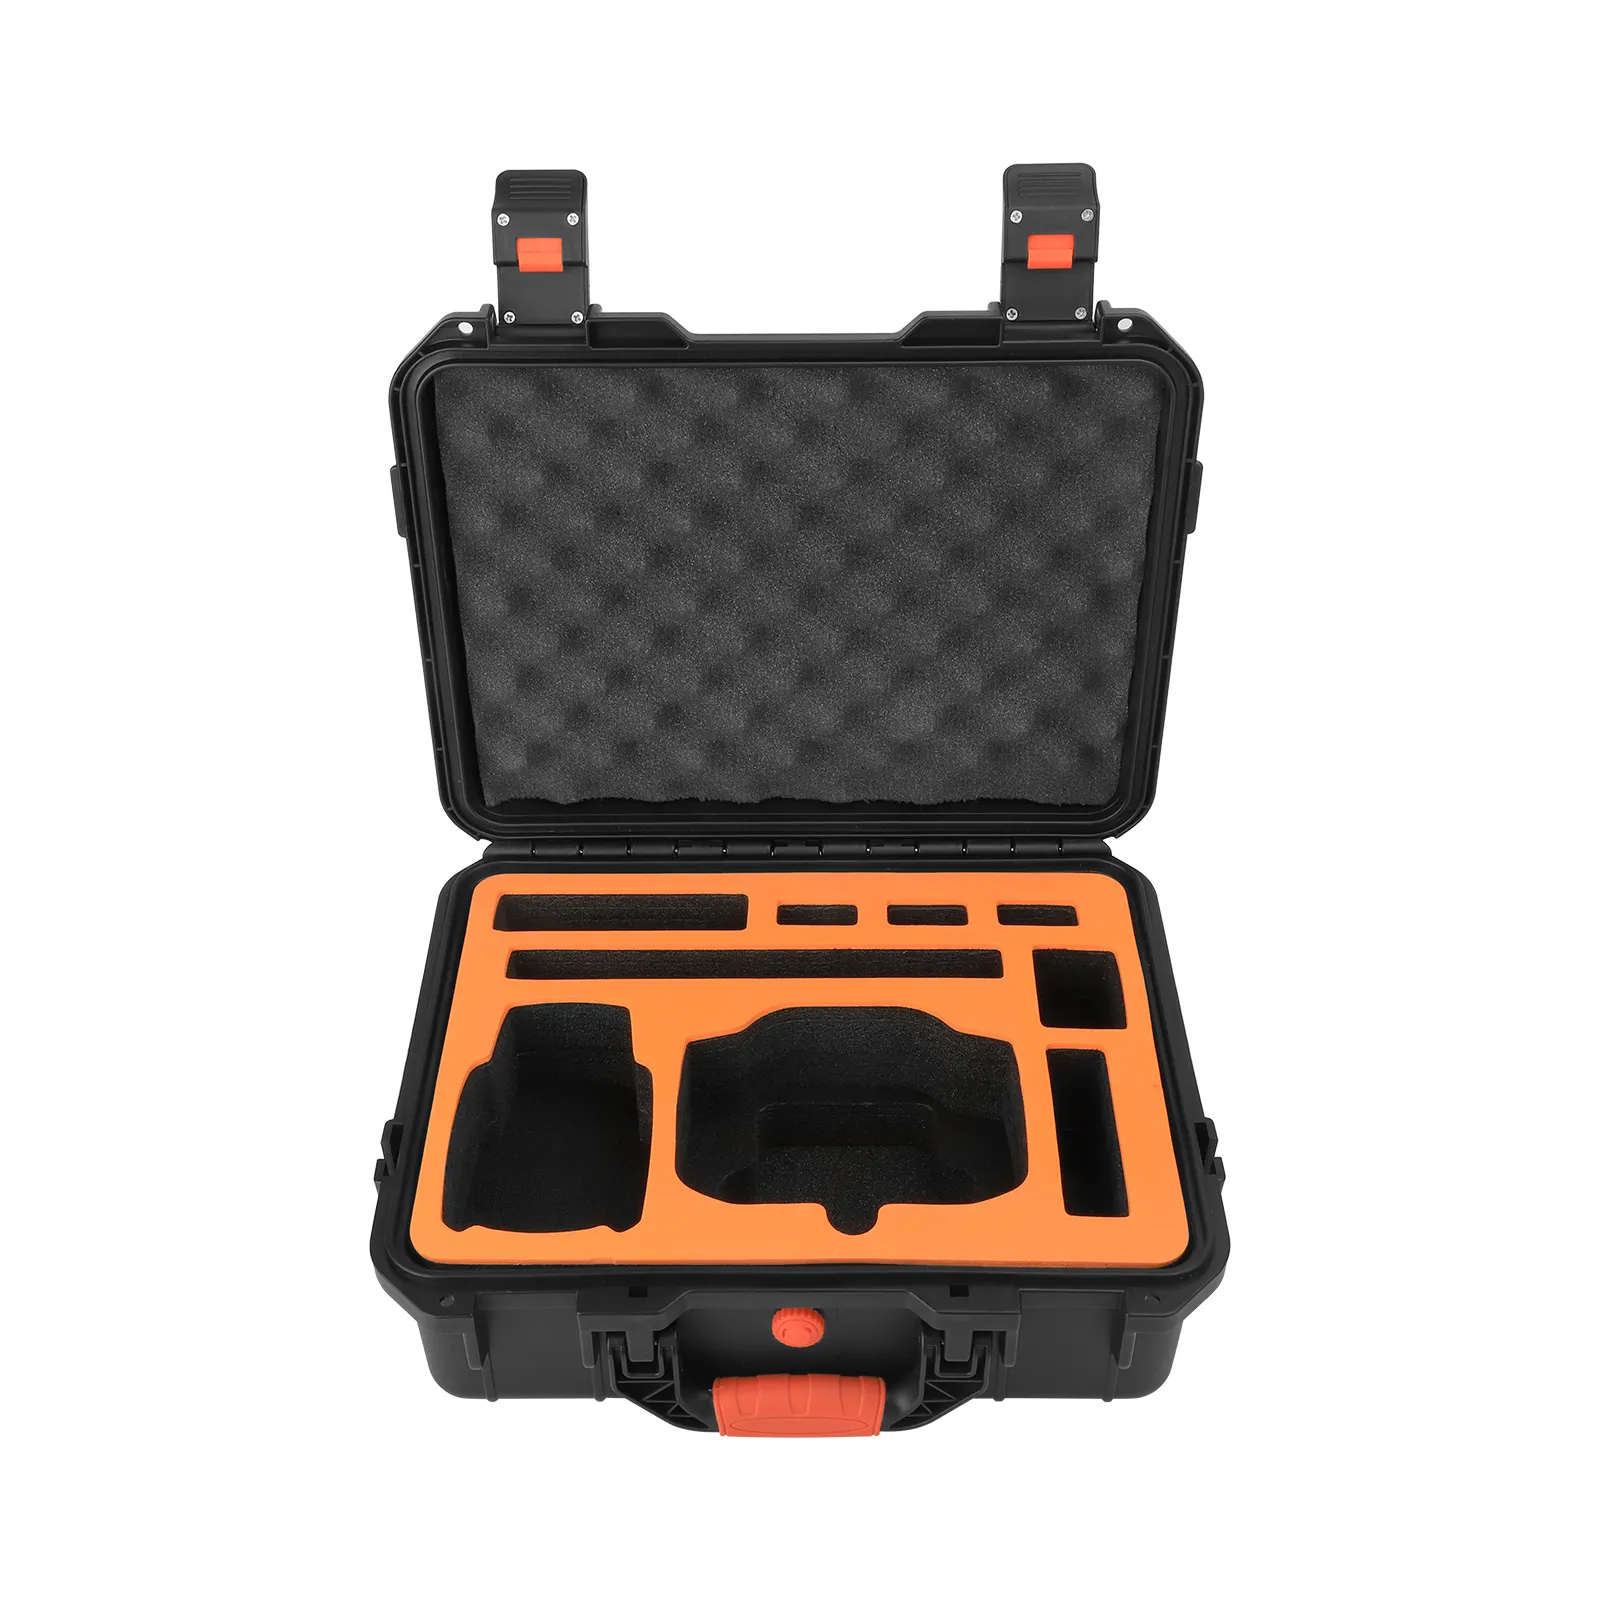 Sunnylife Waterproof Safety Carrying Case Hard Shell Professional Protective Bag Accessories for DJI Mini 2/SE/Mavic Mini